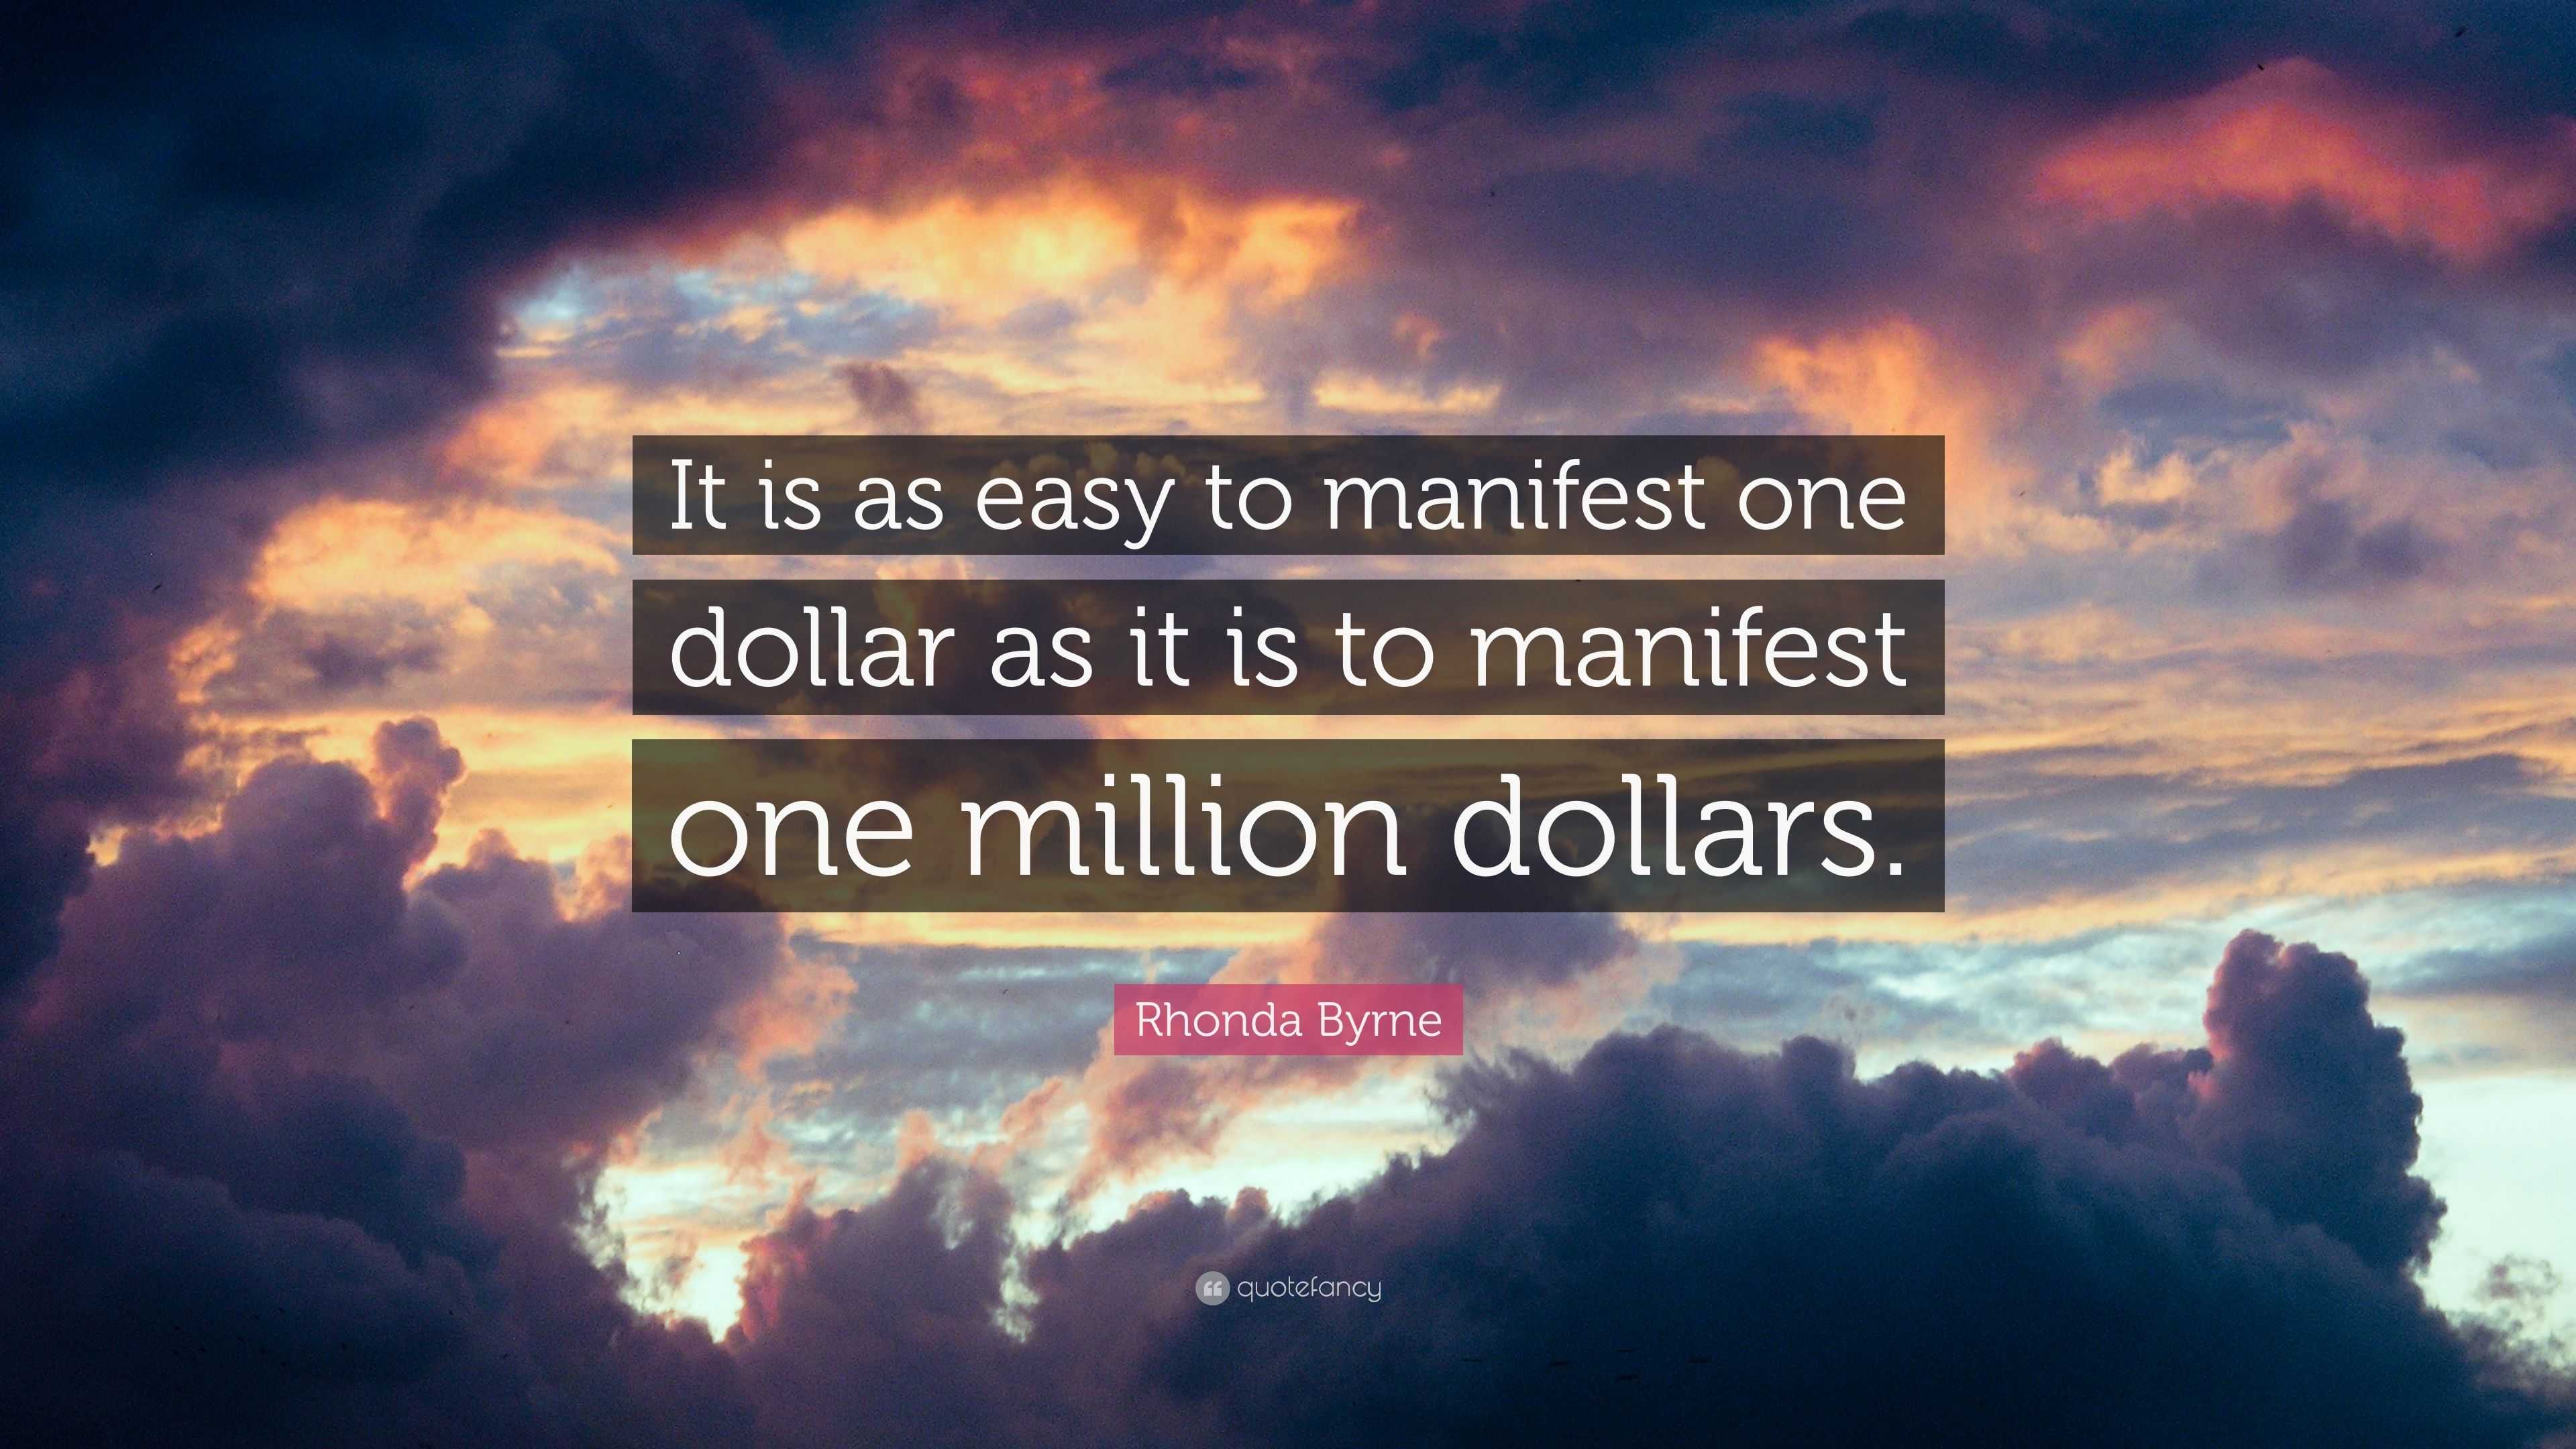 Rhonda Byrne Quote It is as easy to manifest one dollar 